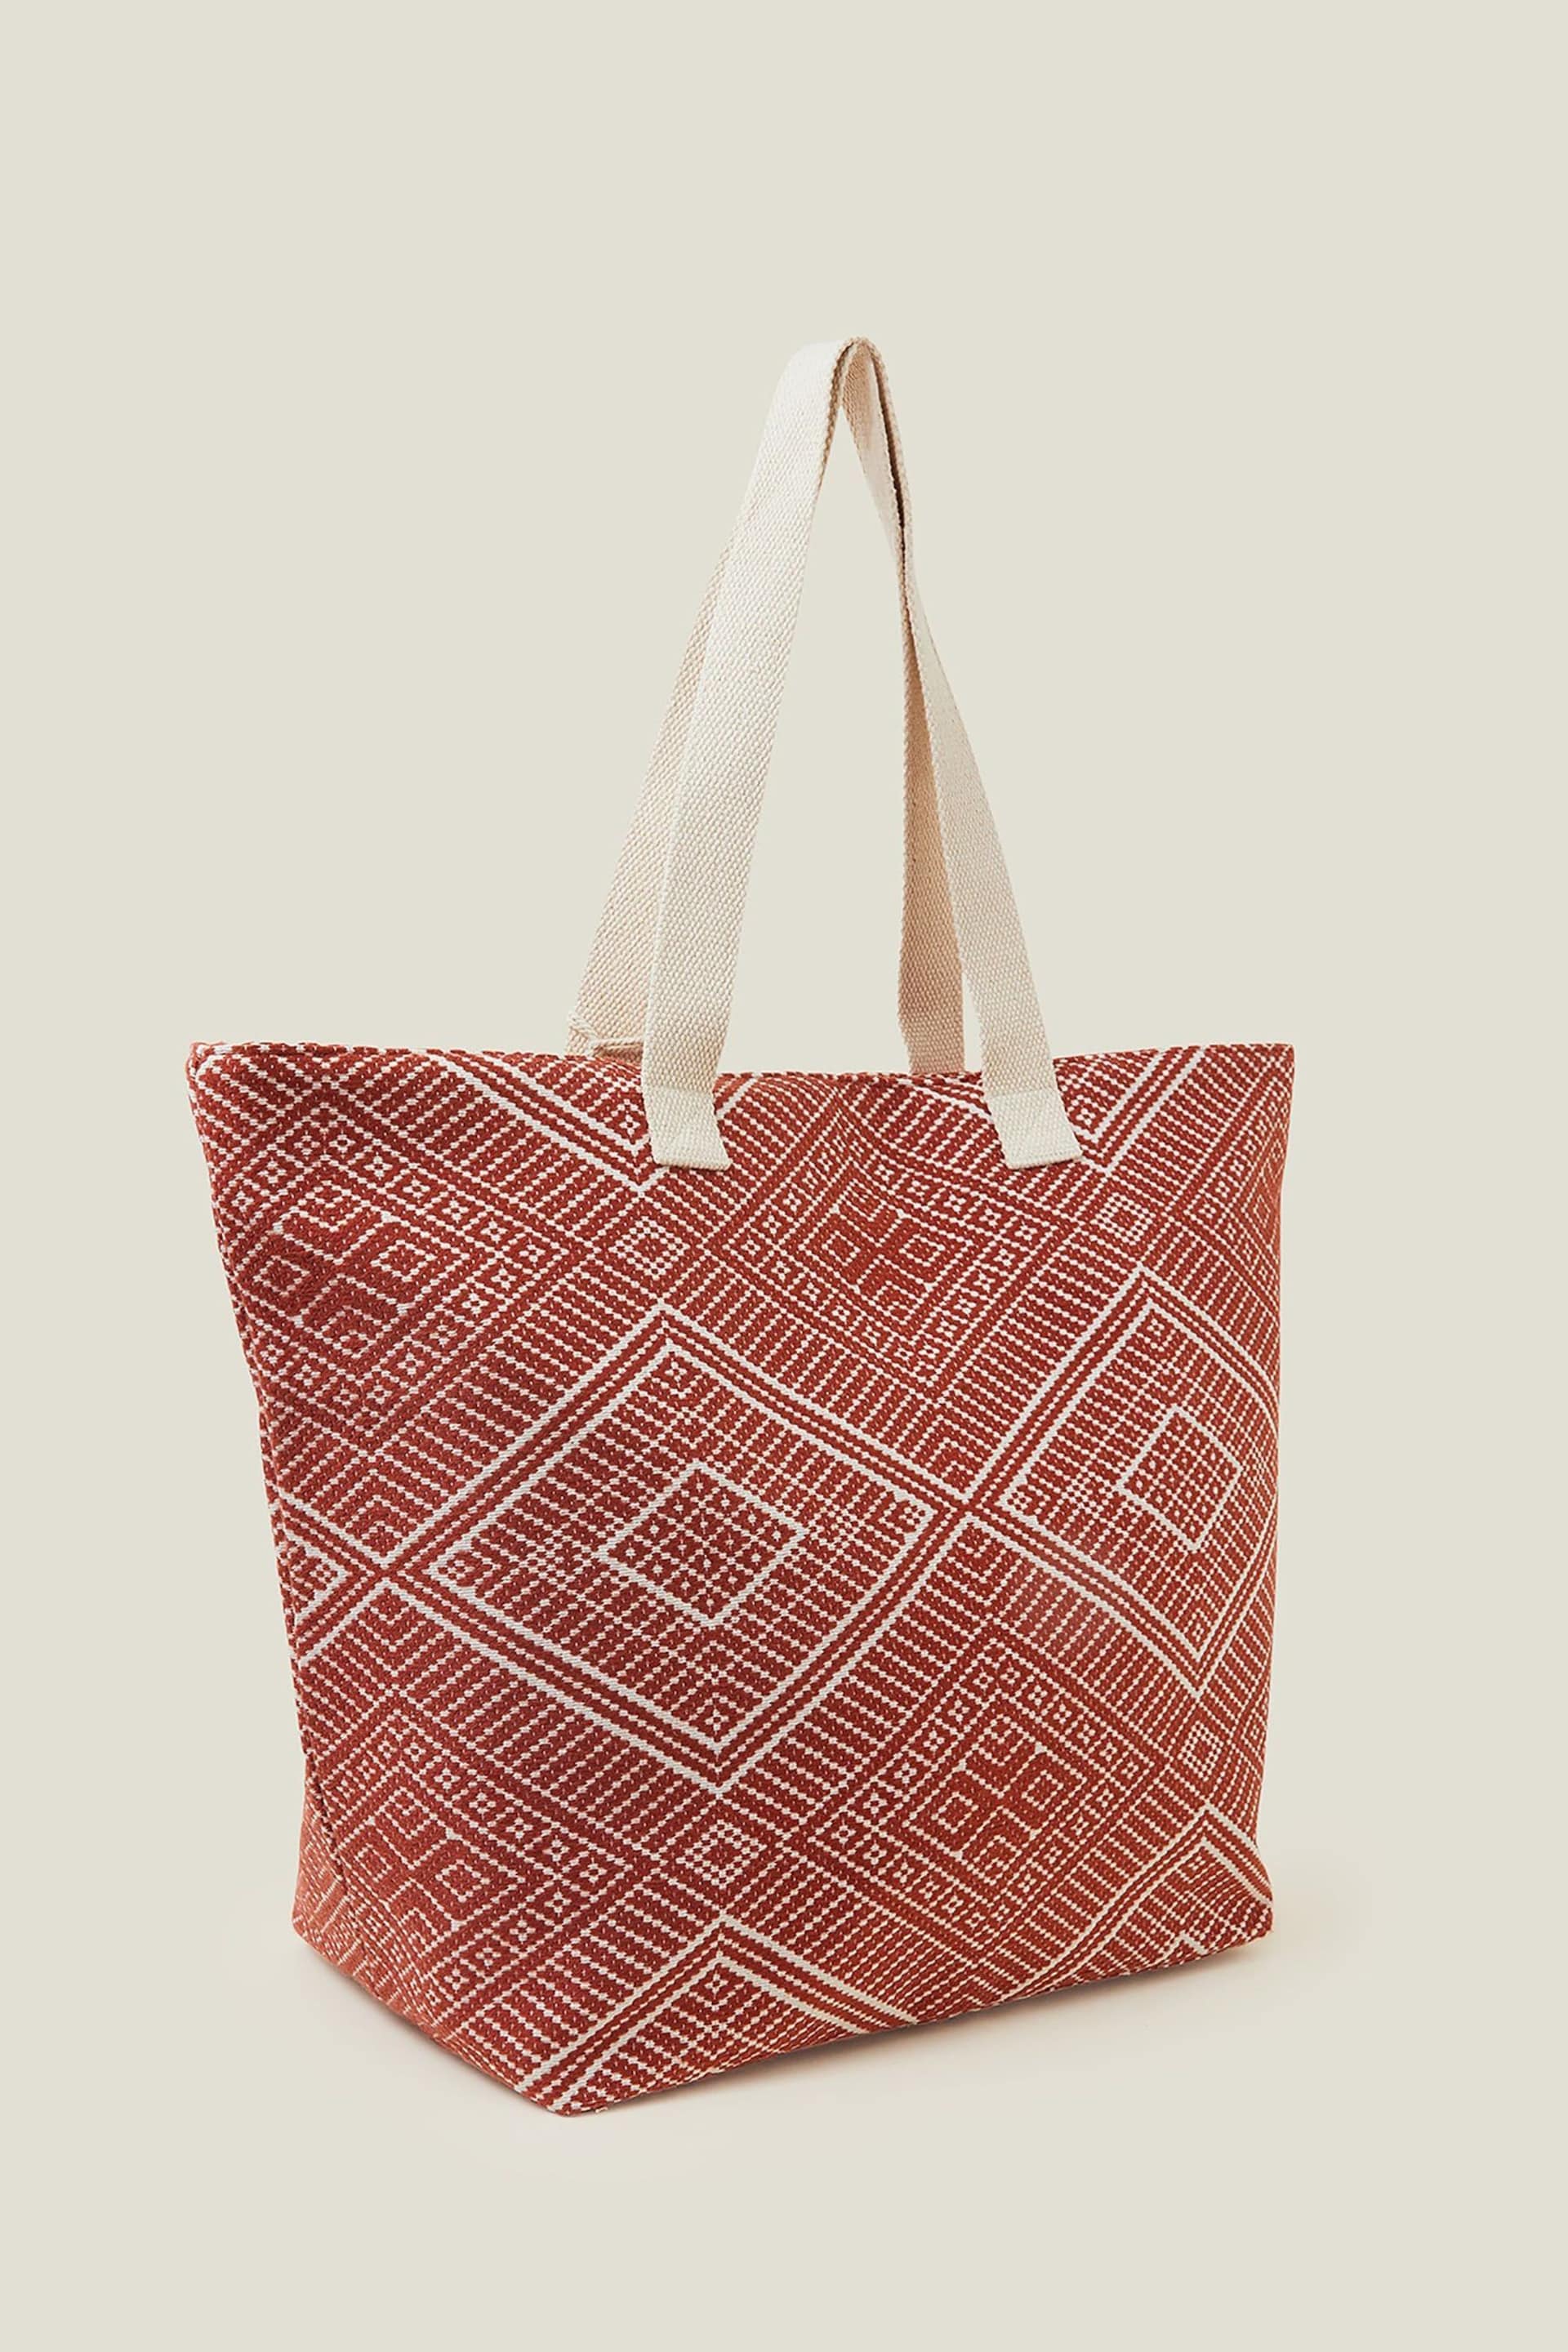 Accessorize Red Jacquard Tote Bag - Image 3 of 4